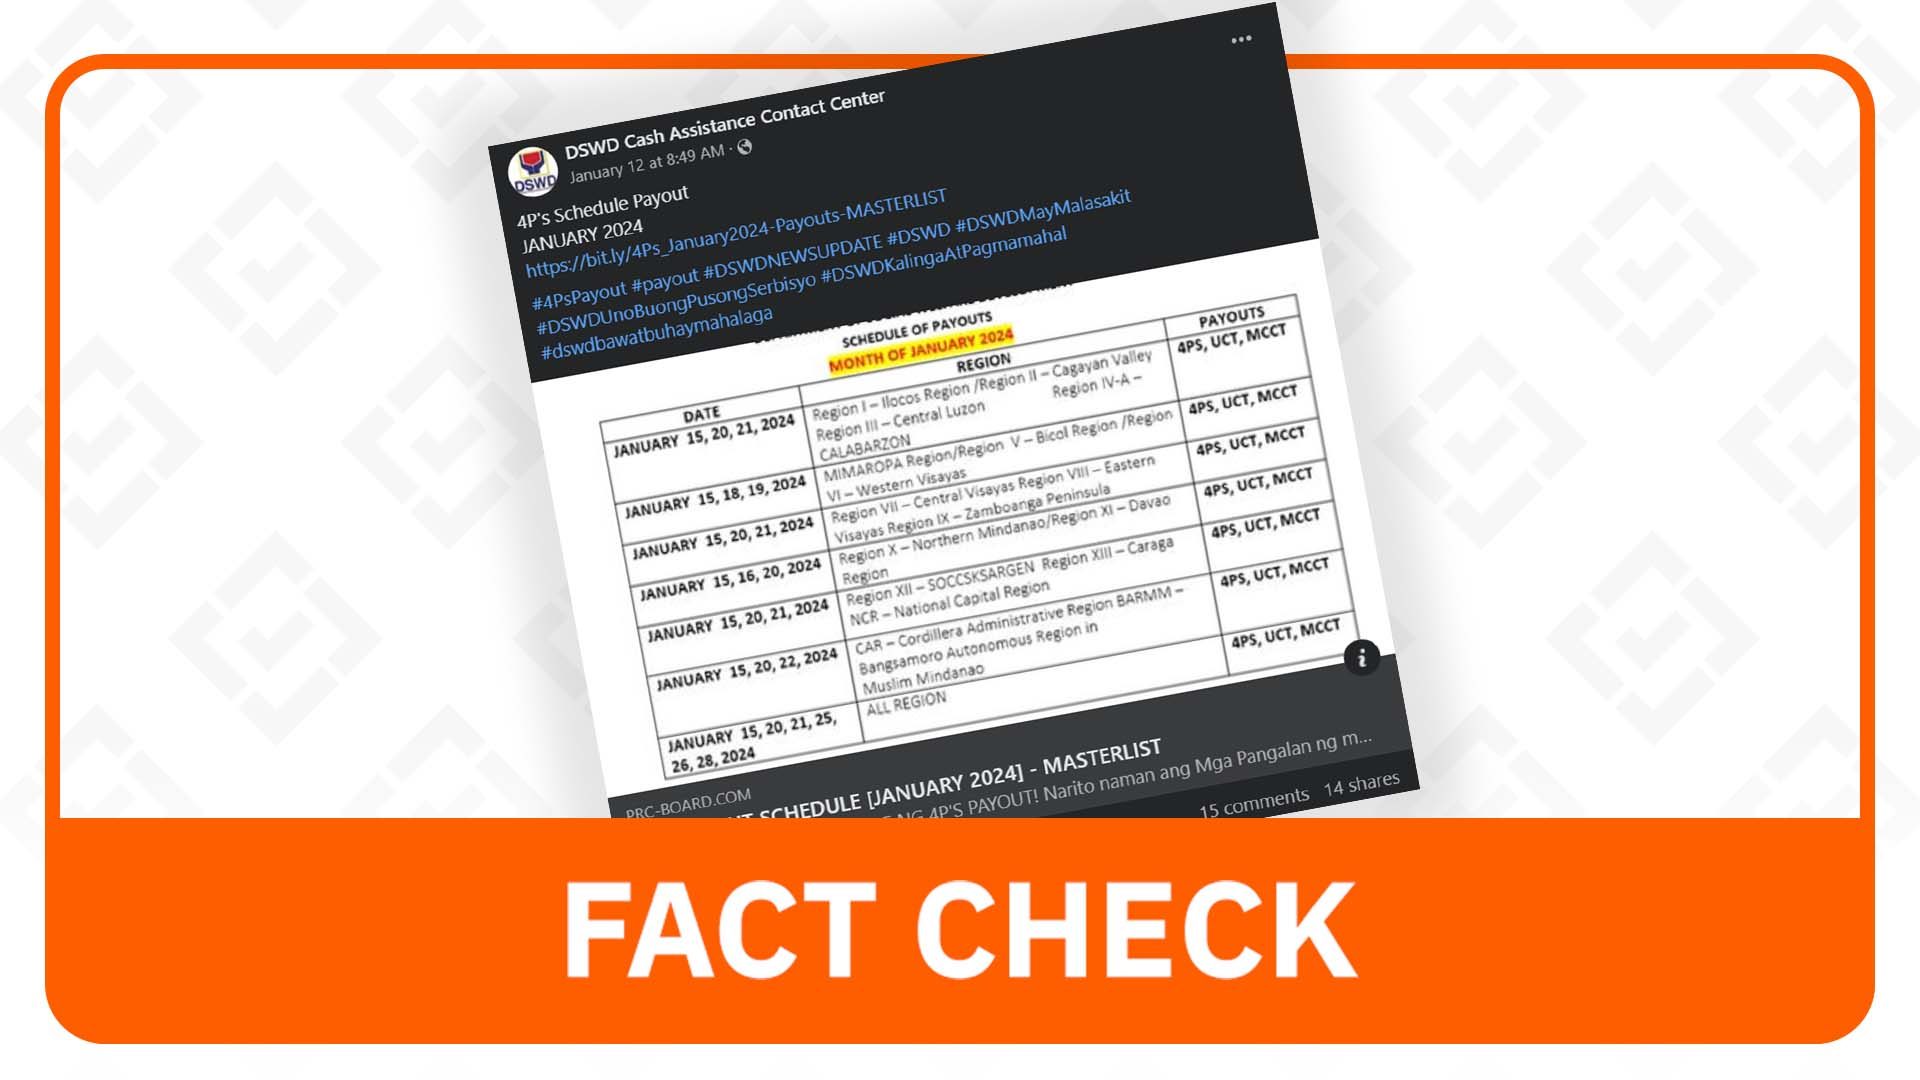 FACT CHECK: No online posts of 4Ps master list, payout schedule – DSWD